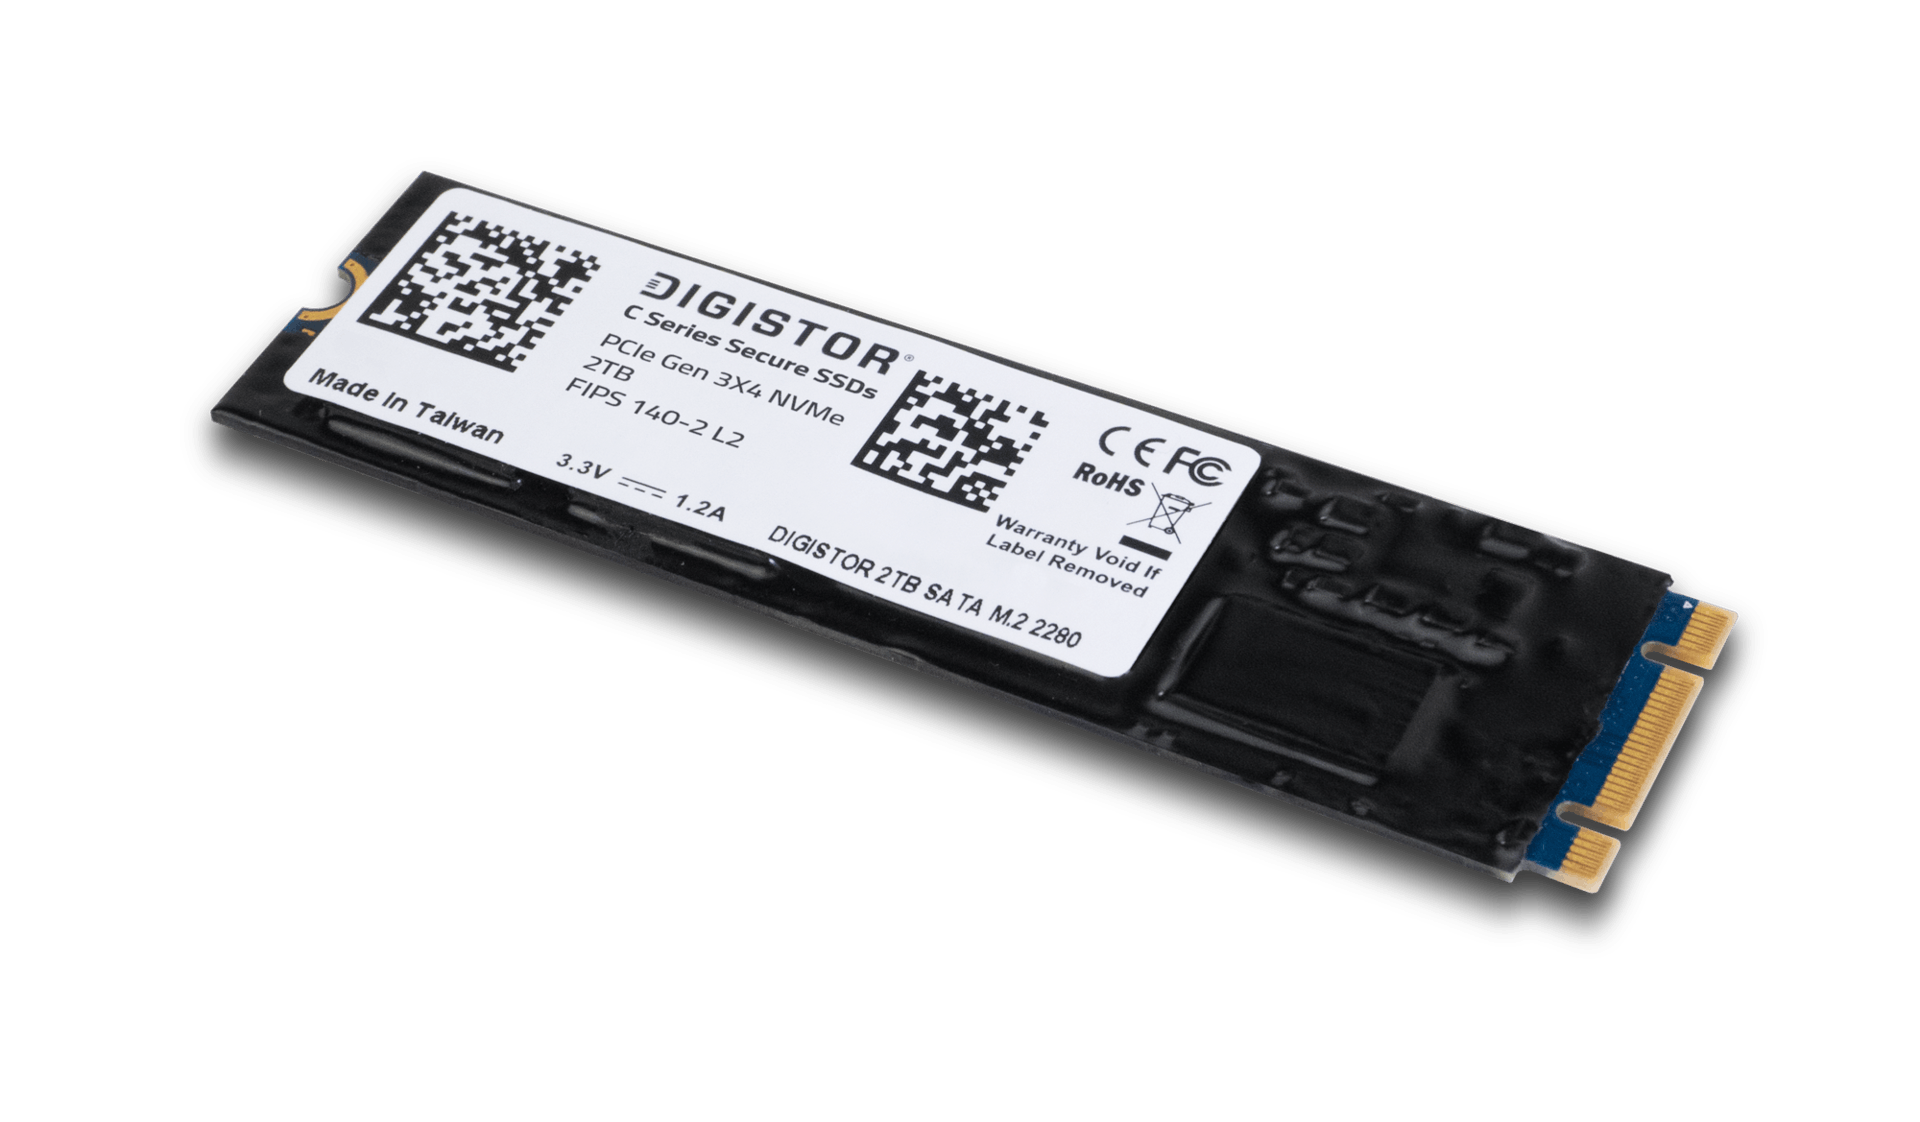 Solid-state drives (SSDs) with cyber security and encryption in military  applications introduced by DIGISTOR Military Aerospace